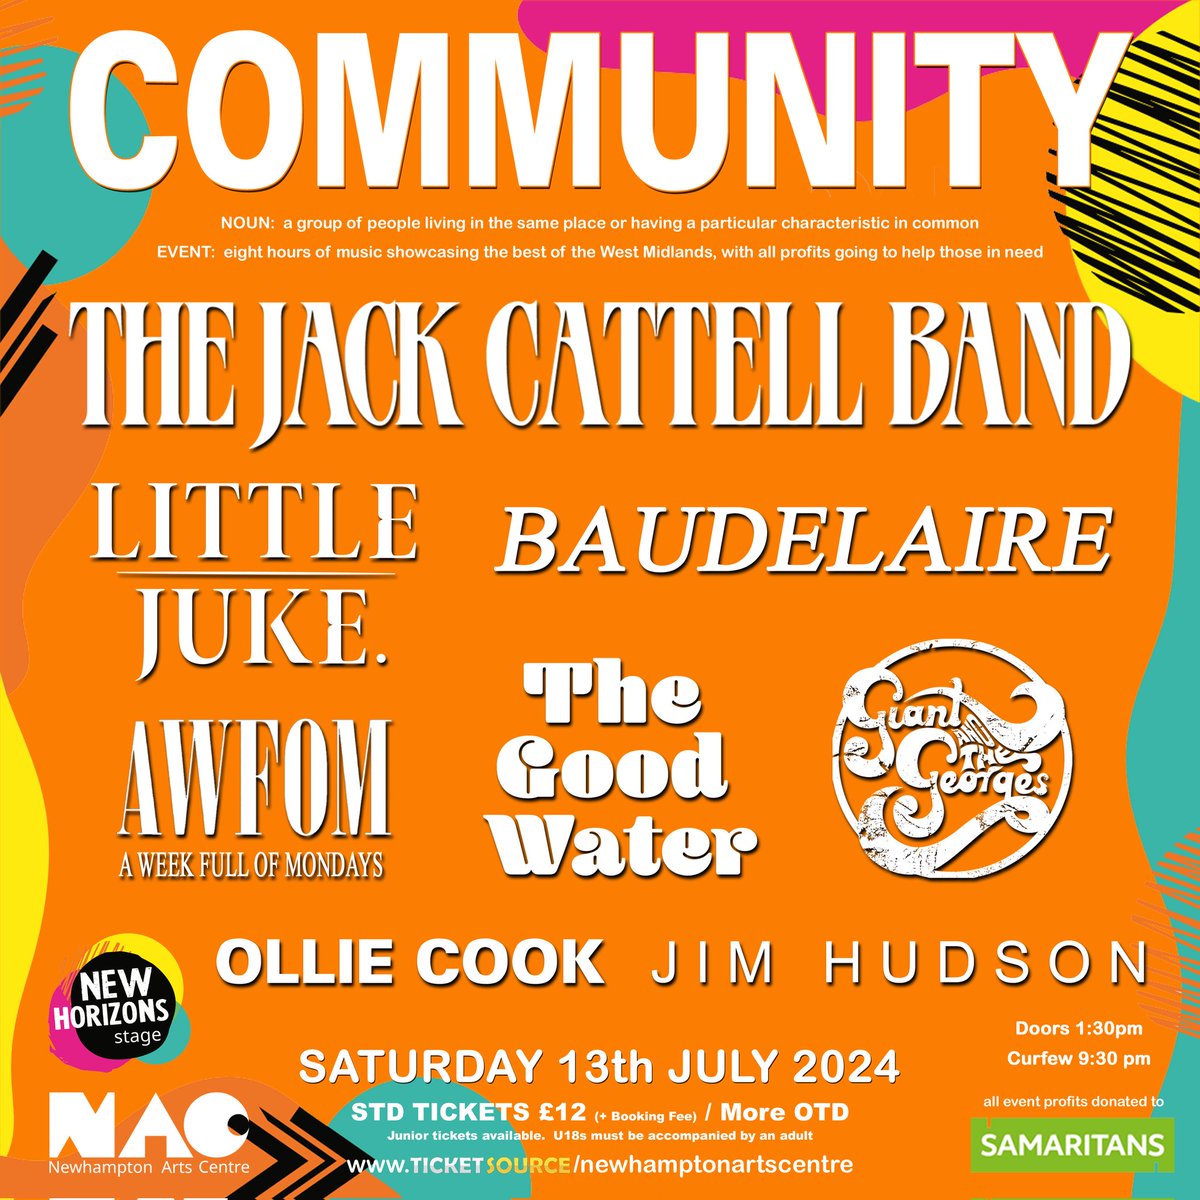 ICYMI... This year's line-up has been announced for the 'Community' show @Newhampton and WHAT A LINE-UP IT IS!!!! 😁 See you on Sat 13th July. Ticket link below: newhamptonarts.co.uk/events/communi…